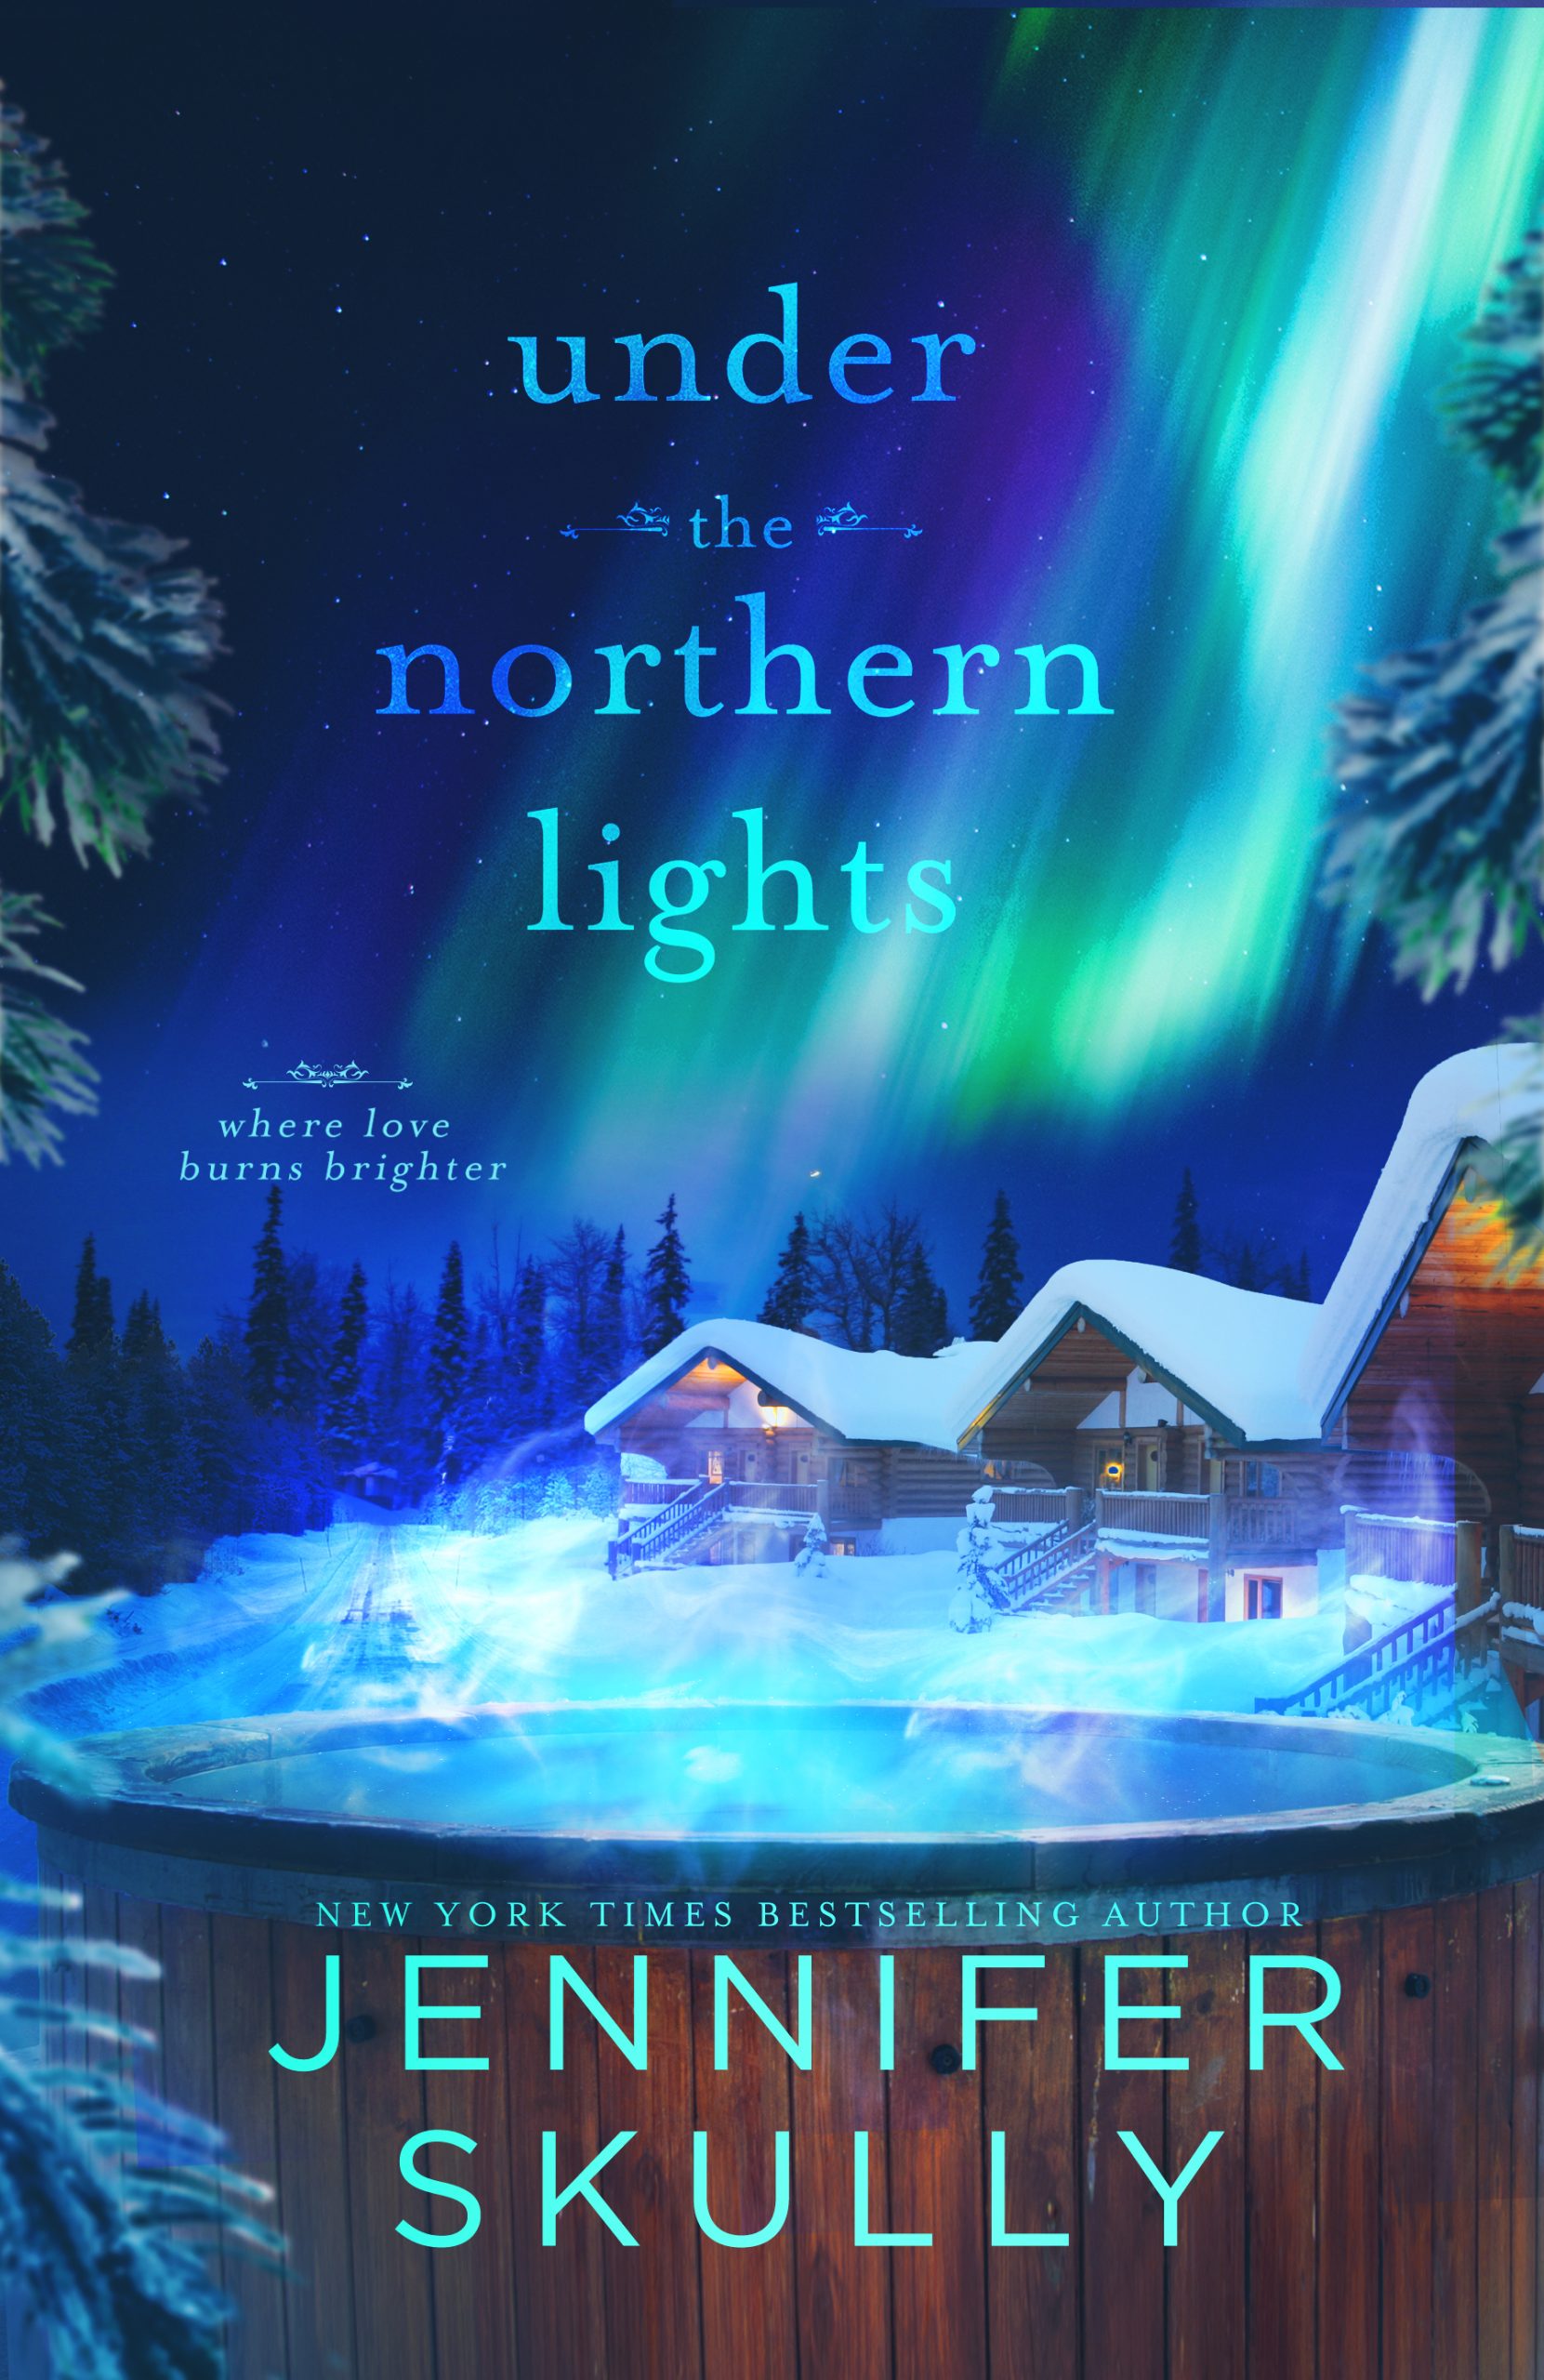 Cover of Under the Northern Lights - Where love burns brighter - by New York Times Bestselling Author Jennifer Skully